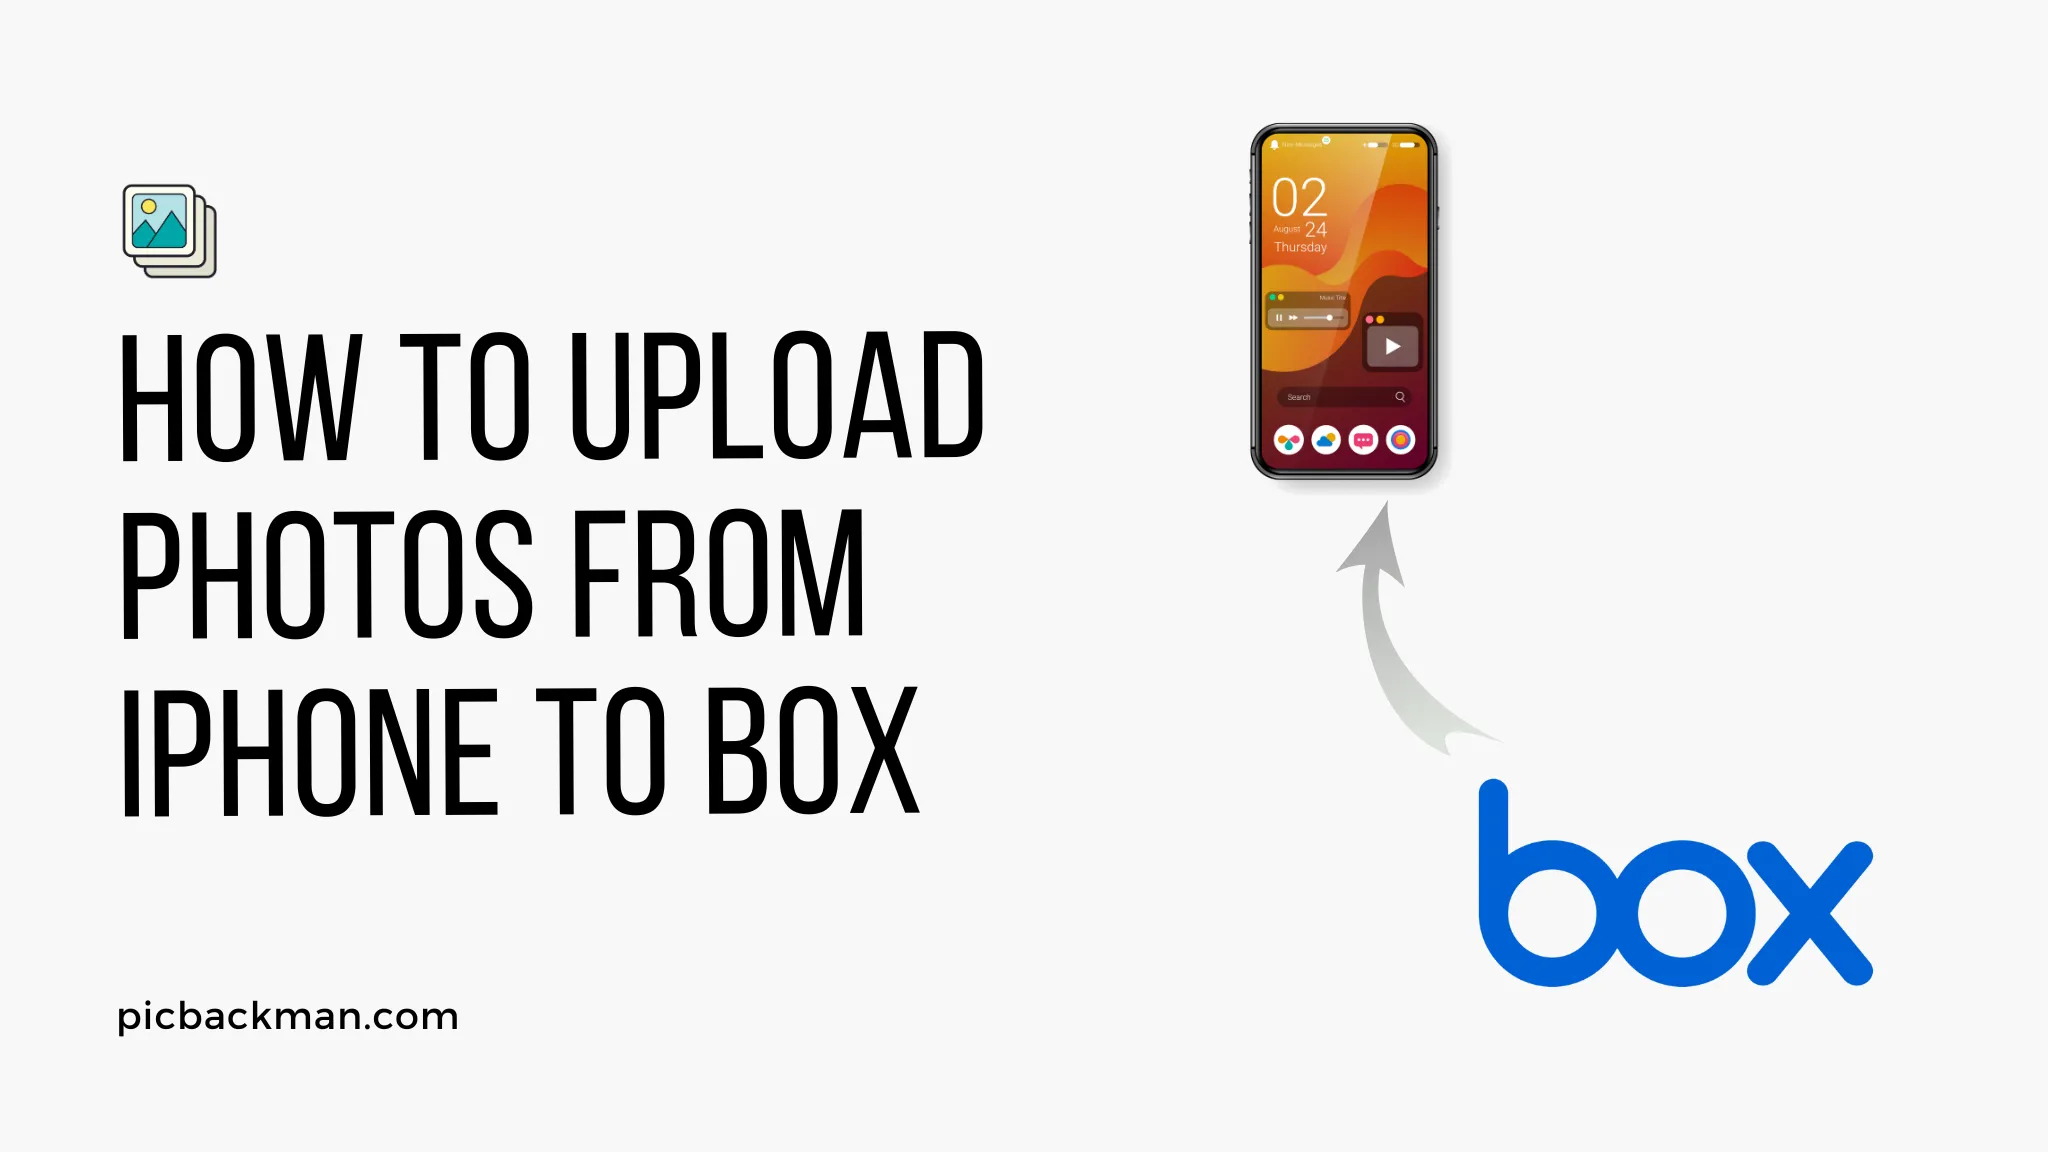 How to upload photos from iPhone to Box